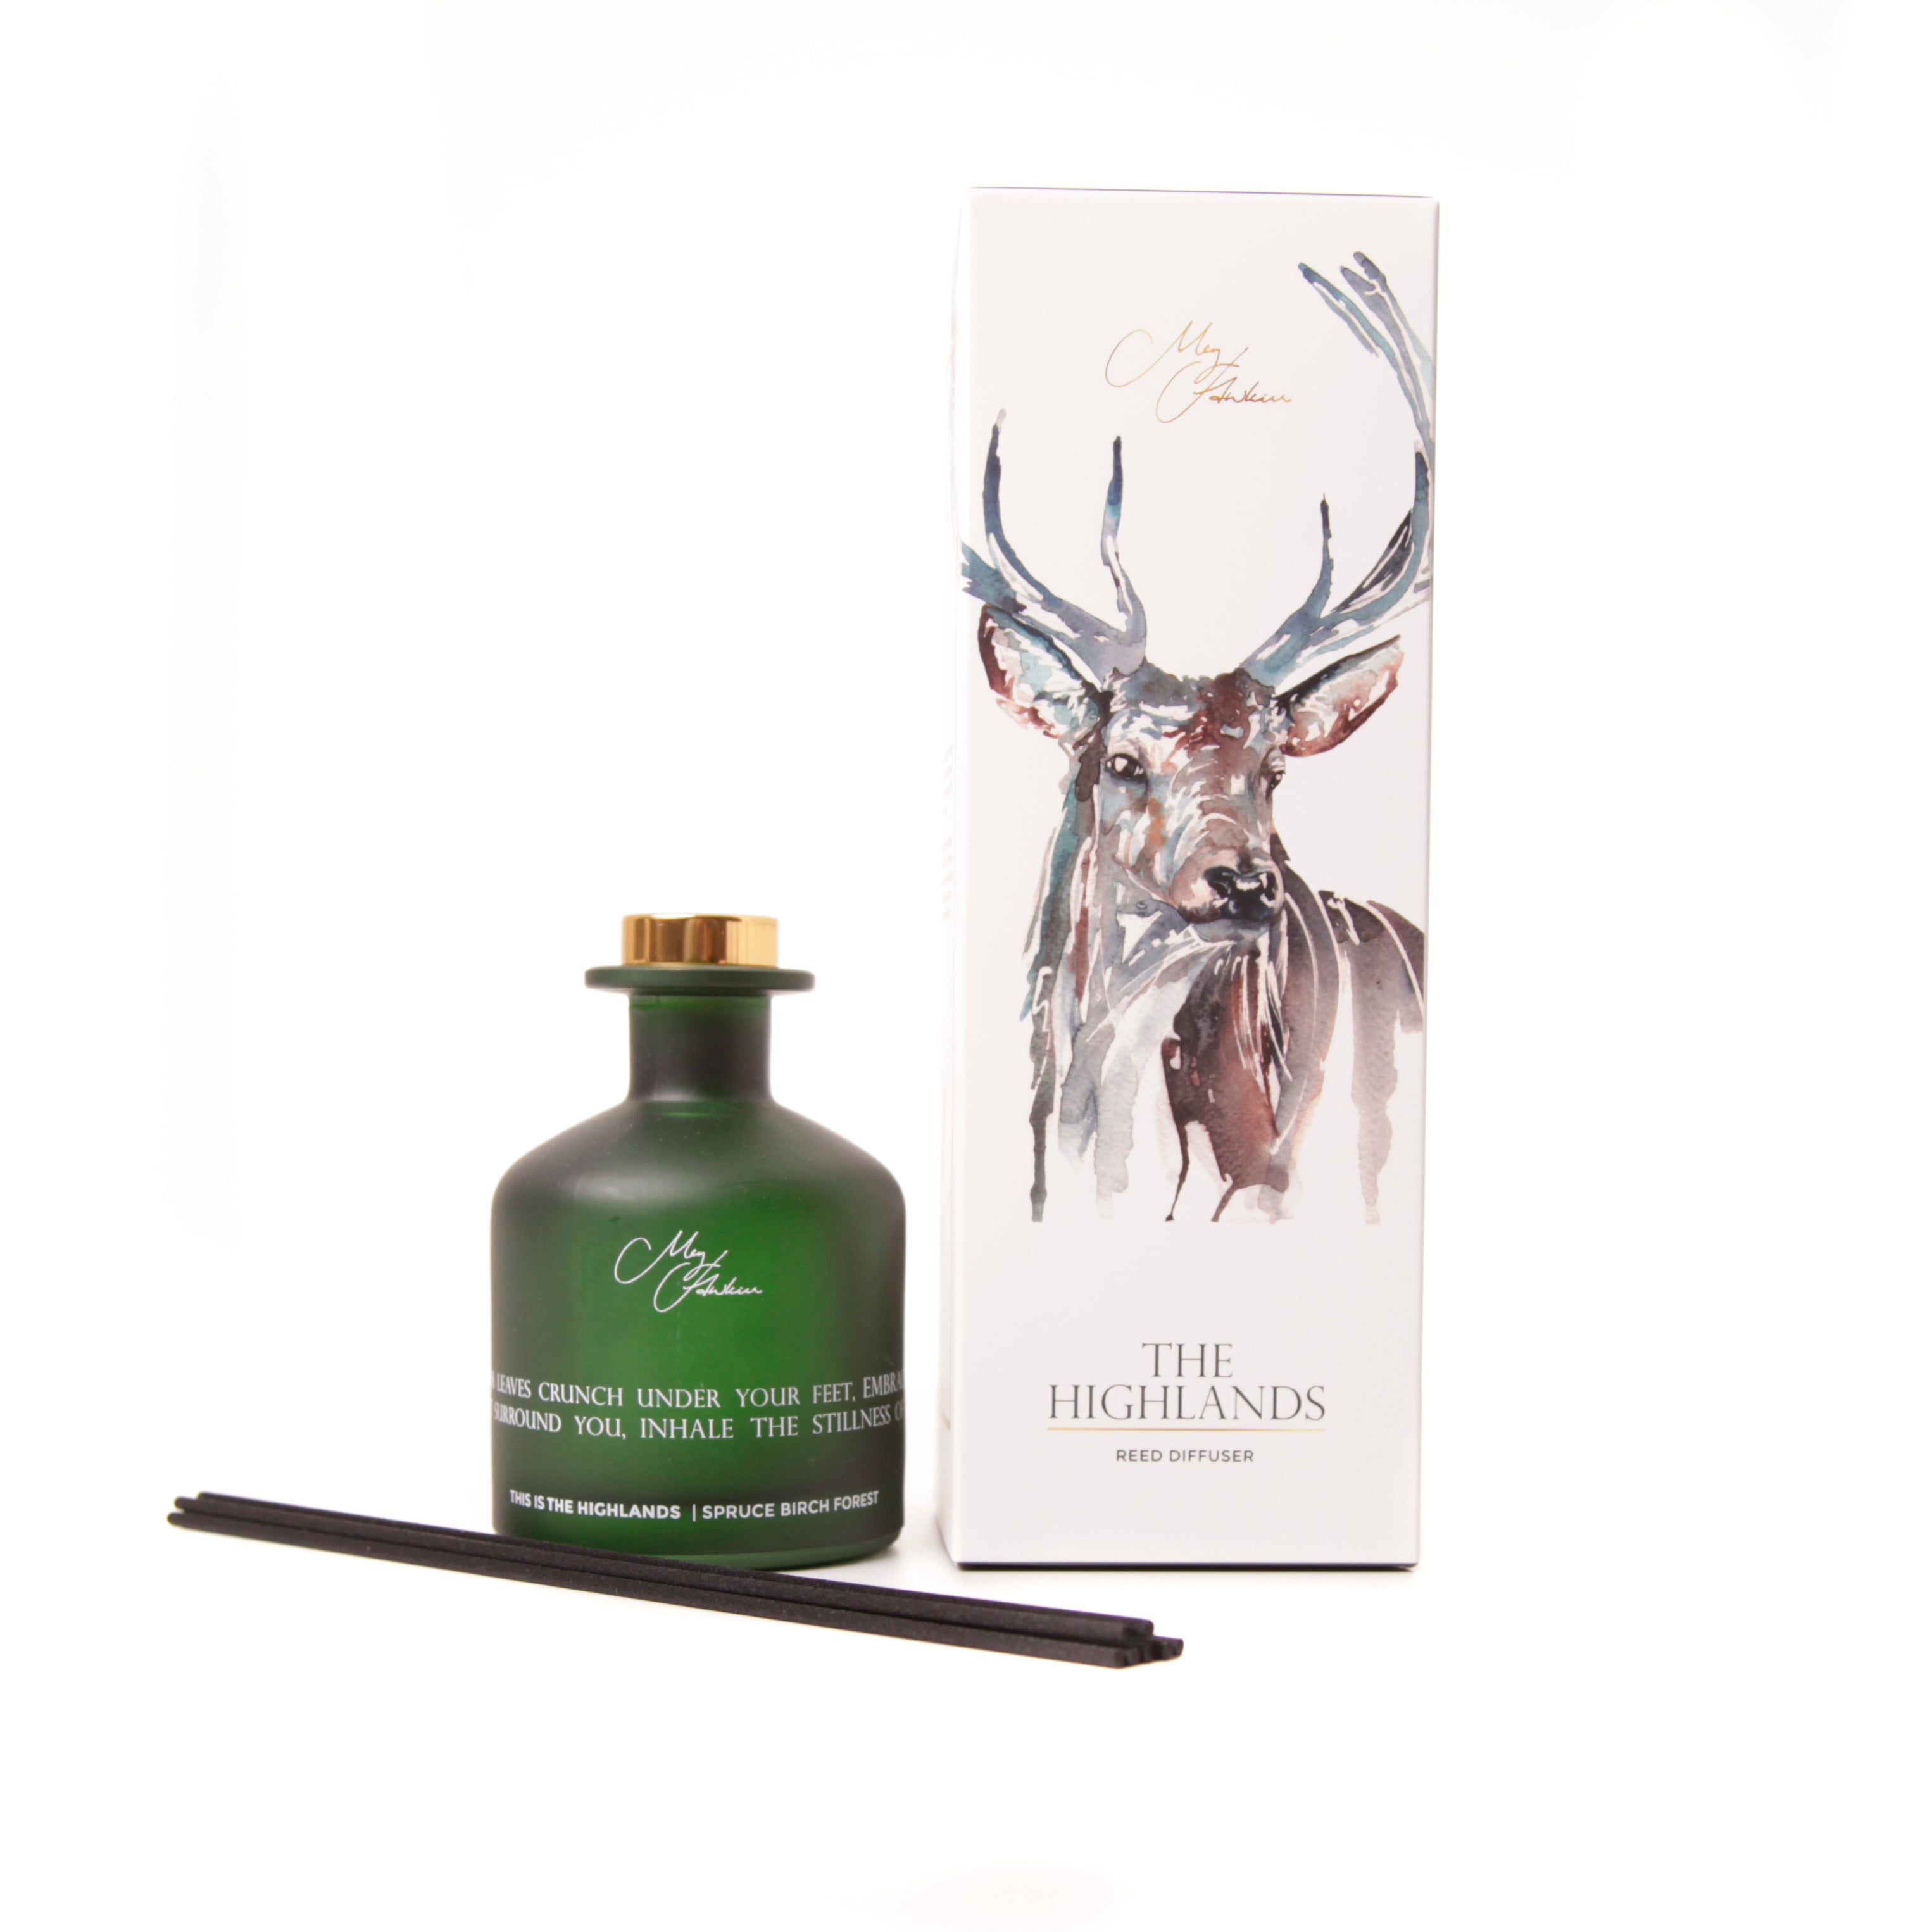 The Highlands' Stag Design Diffuser